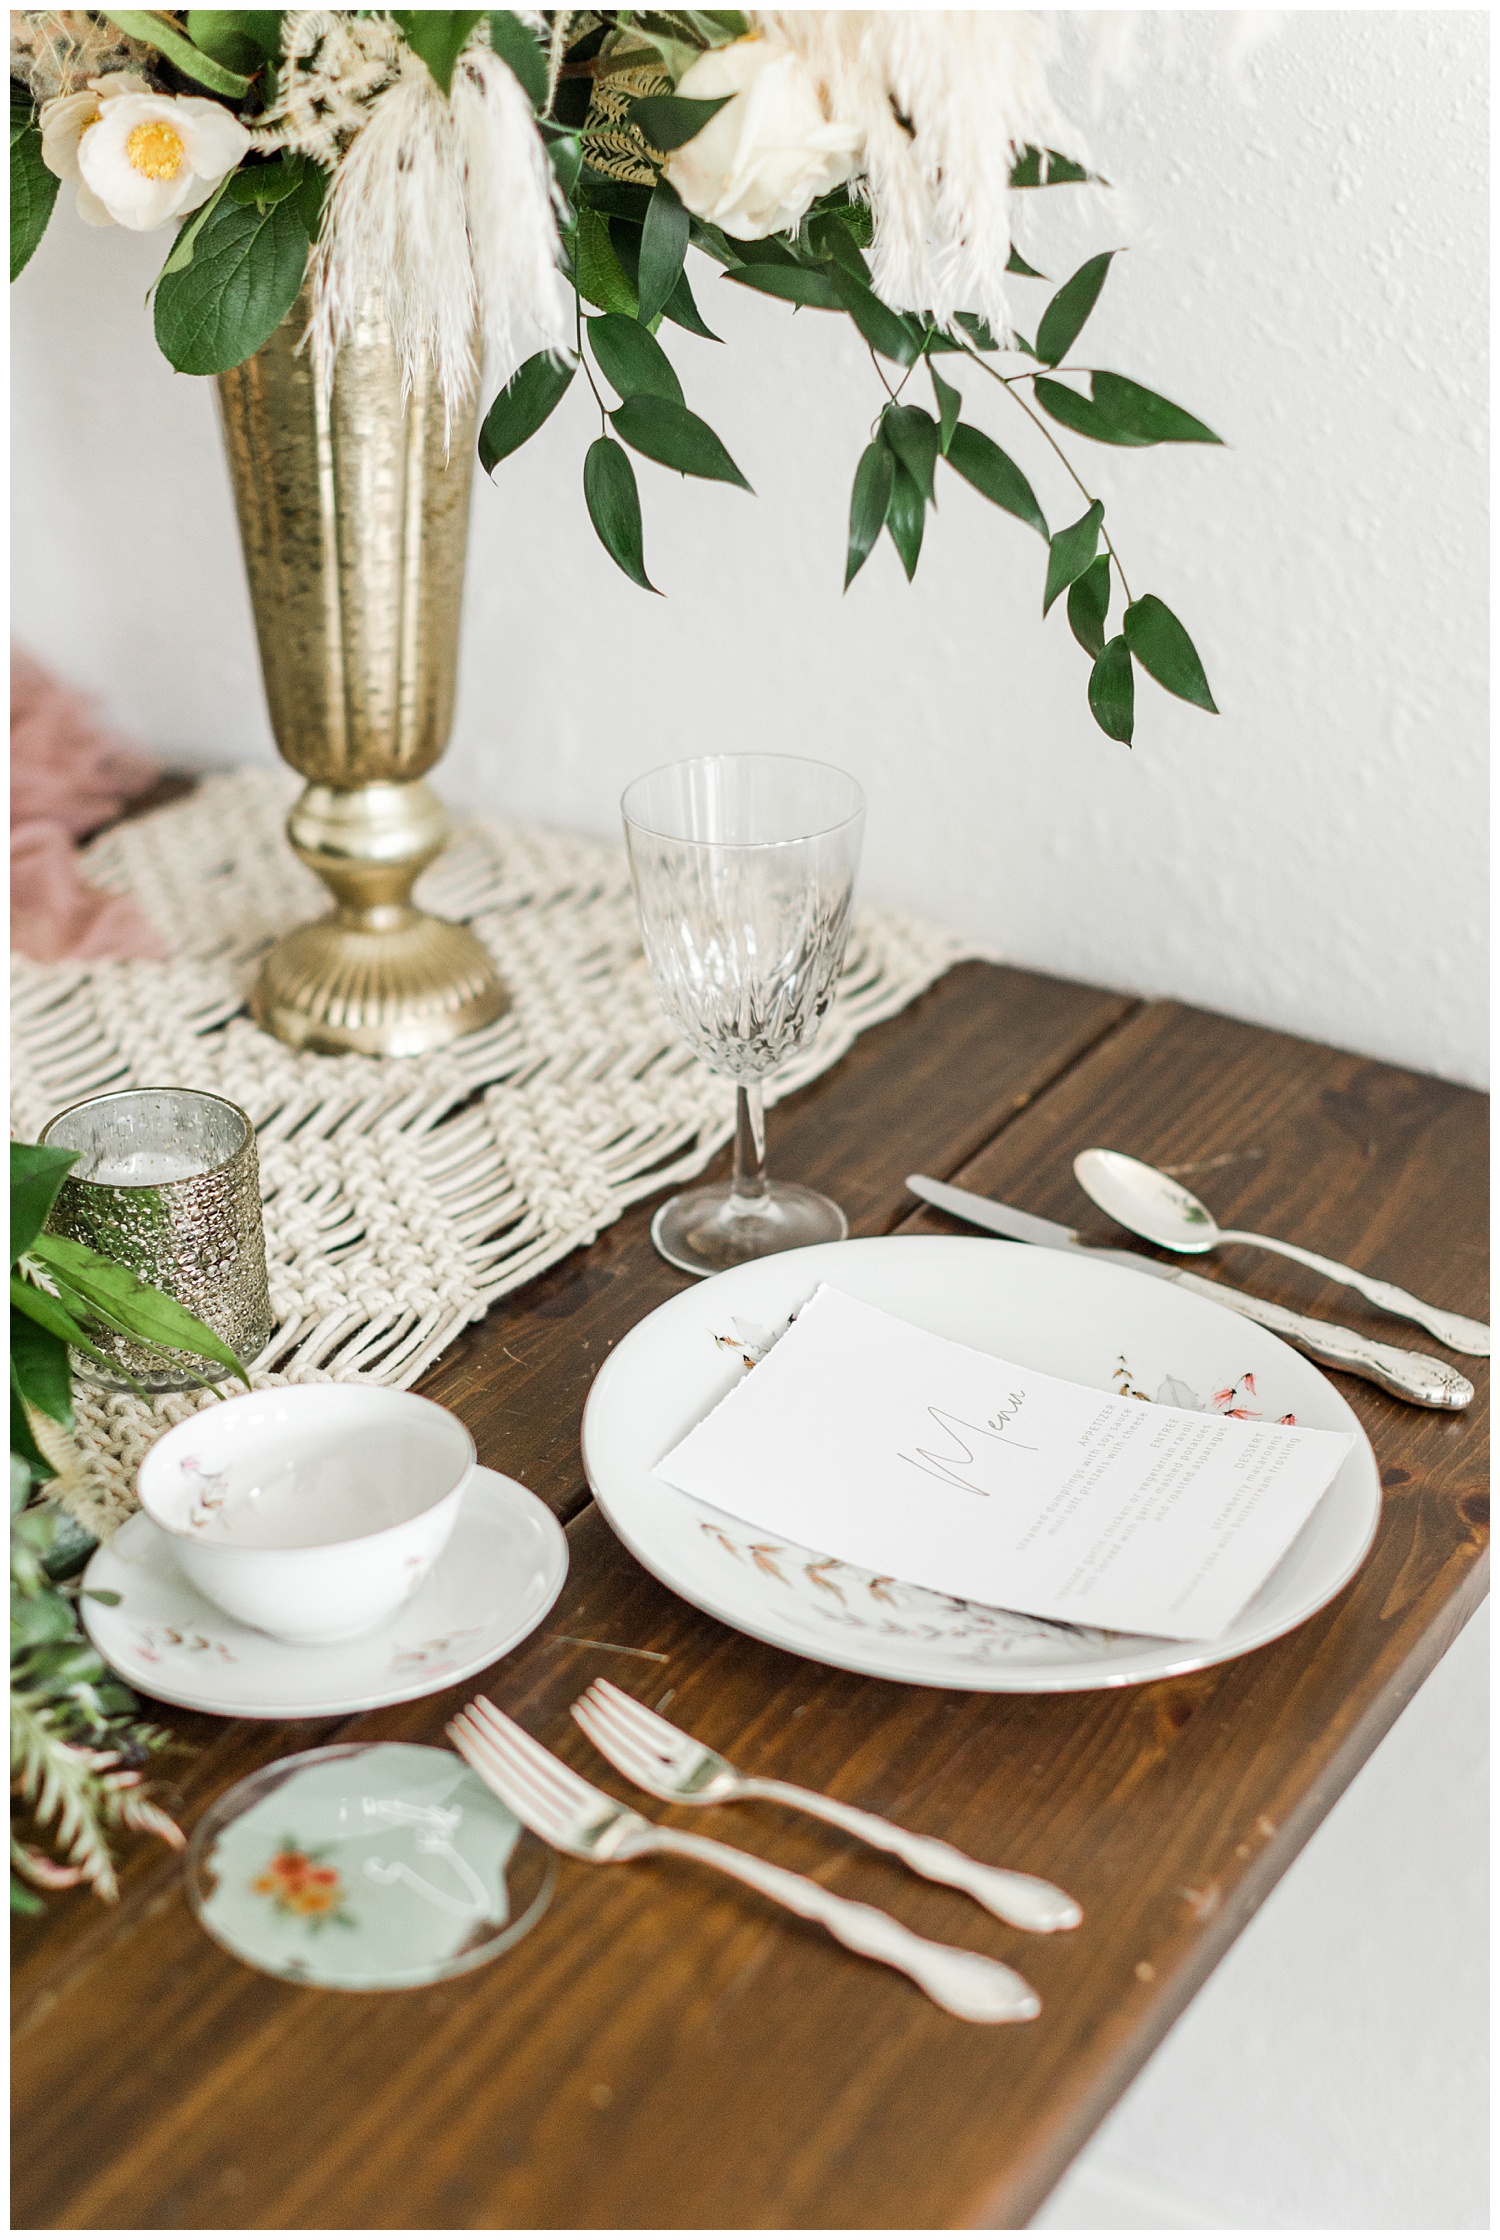 Vintage blush wedding place setting complete with boho florals, macrame and eucalyptus table runner and antique china | CB Studio